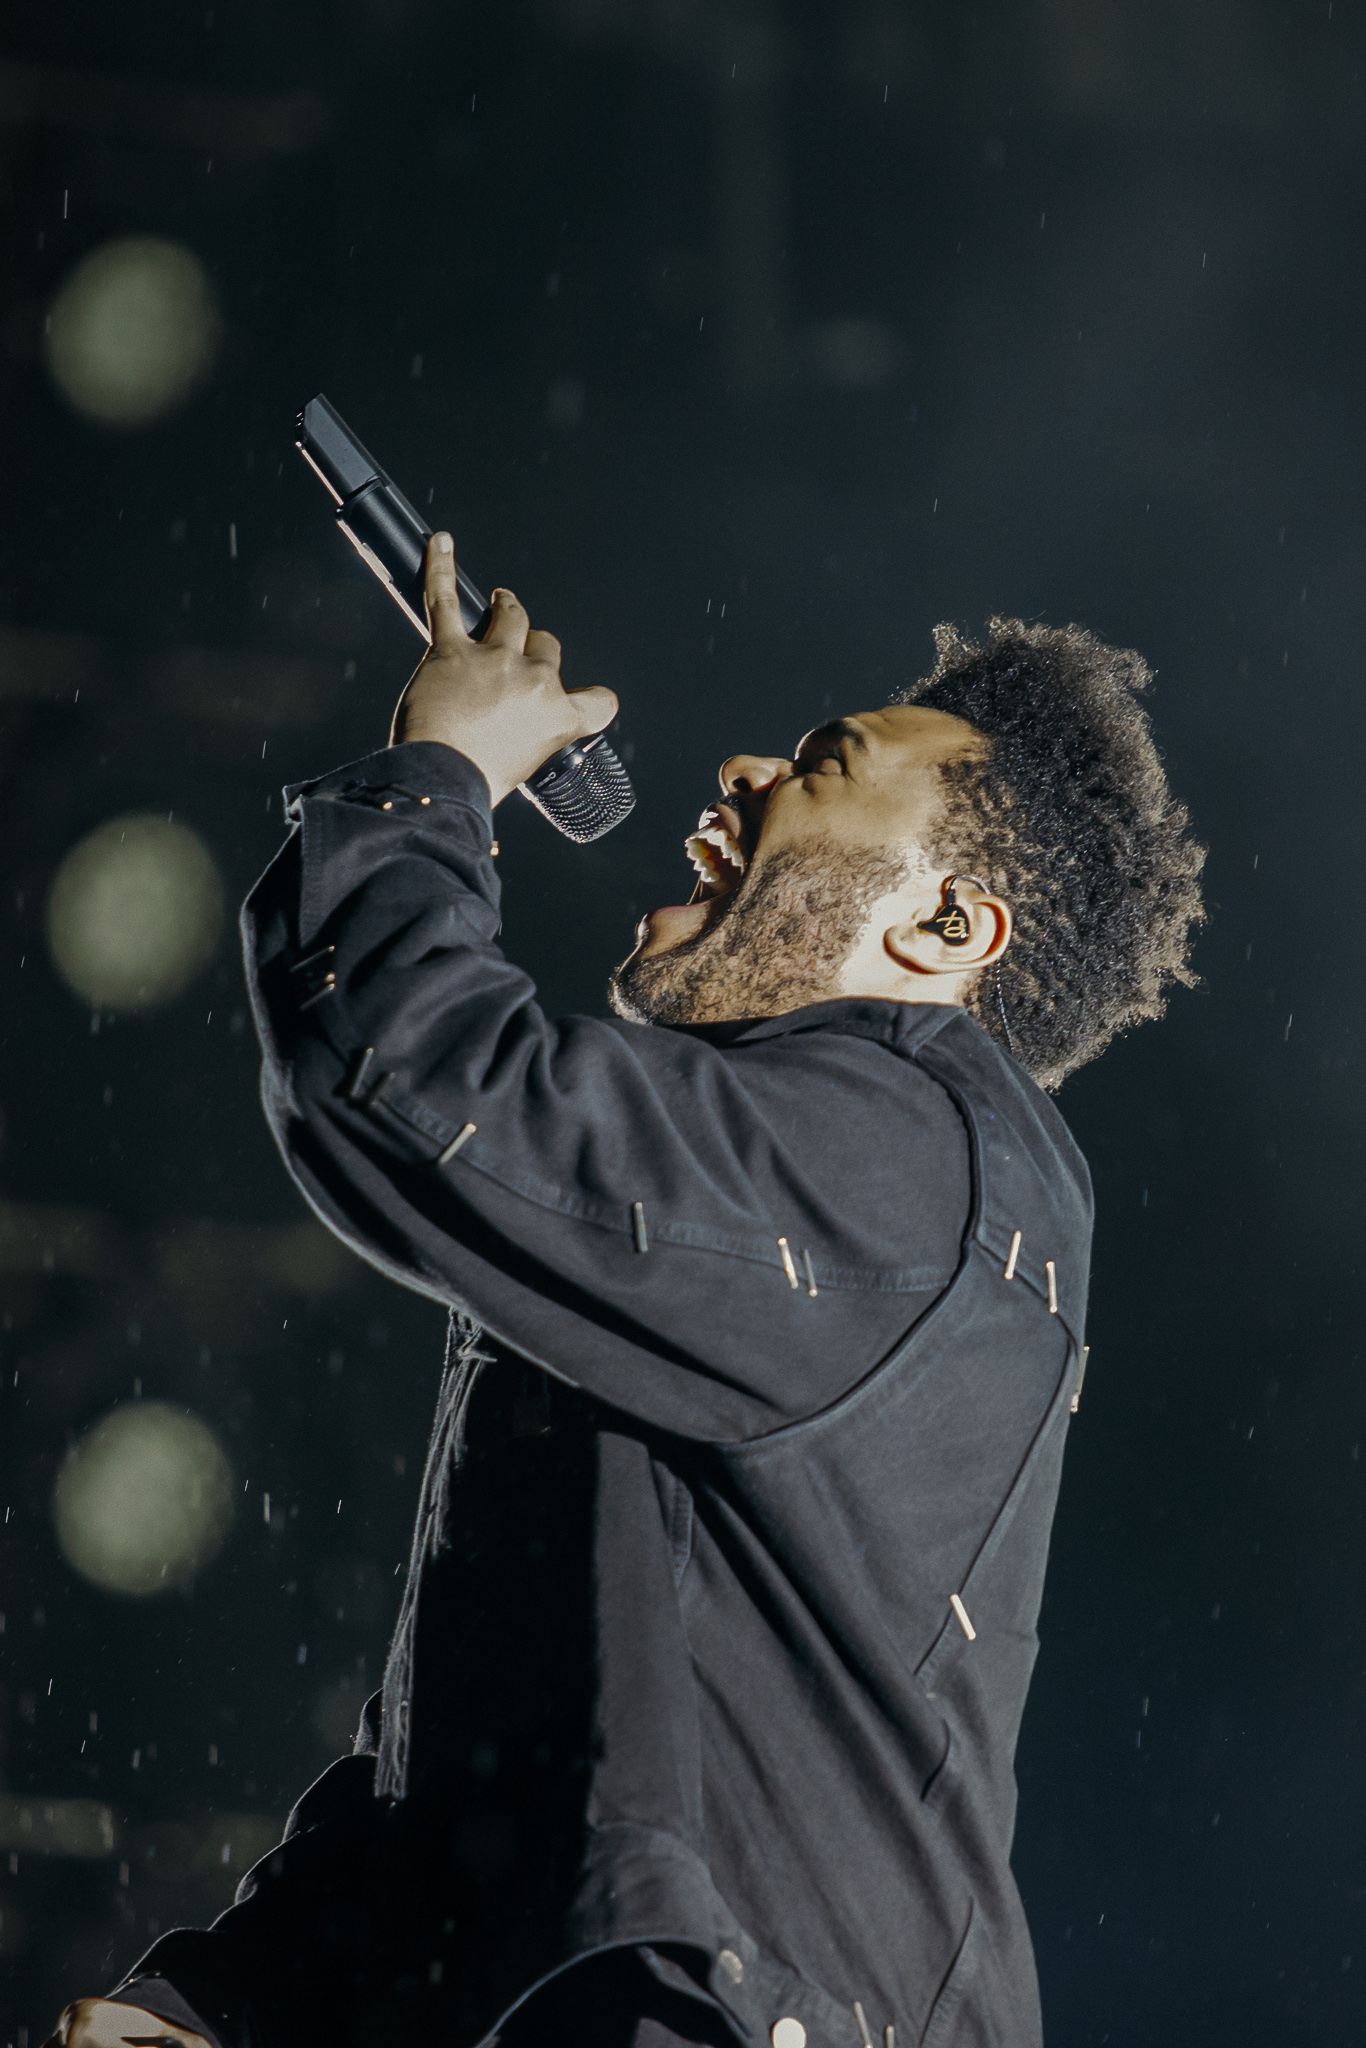 The Weeknd en Live Out